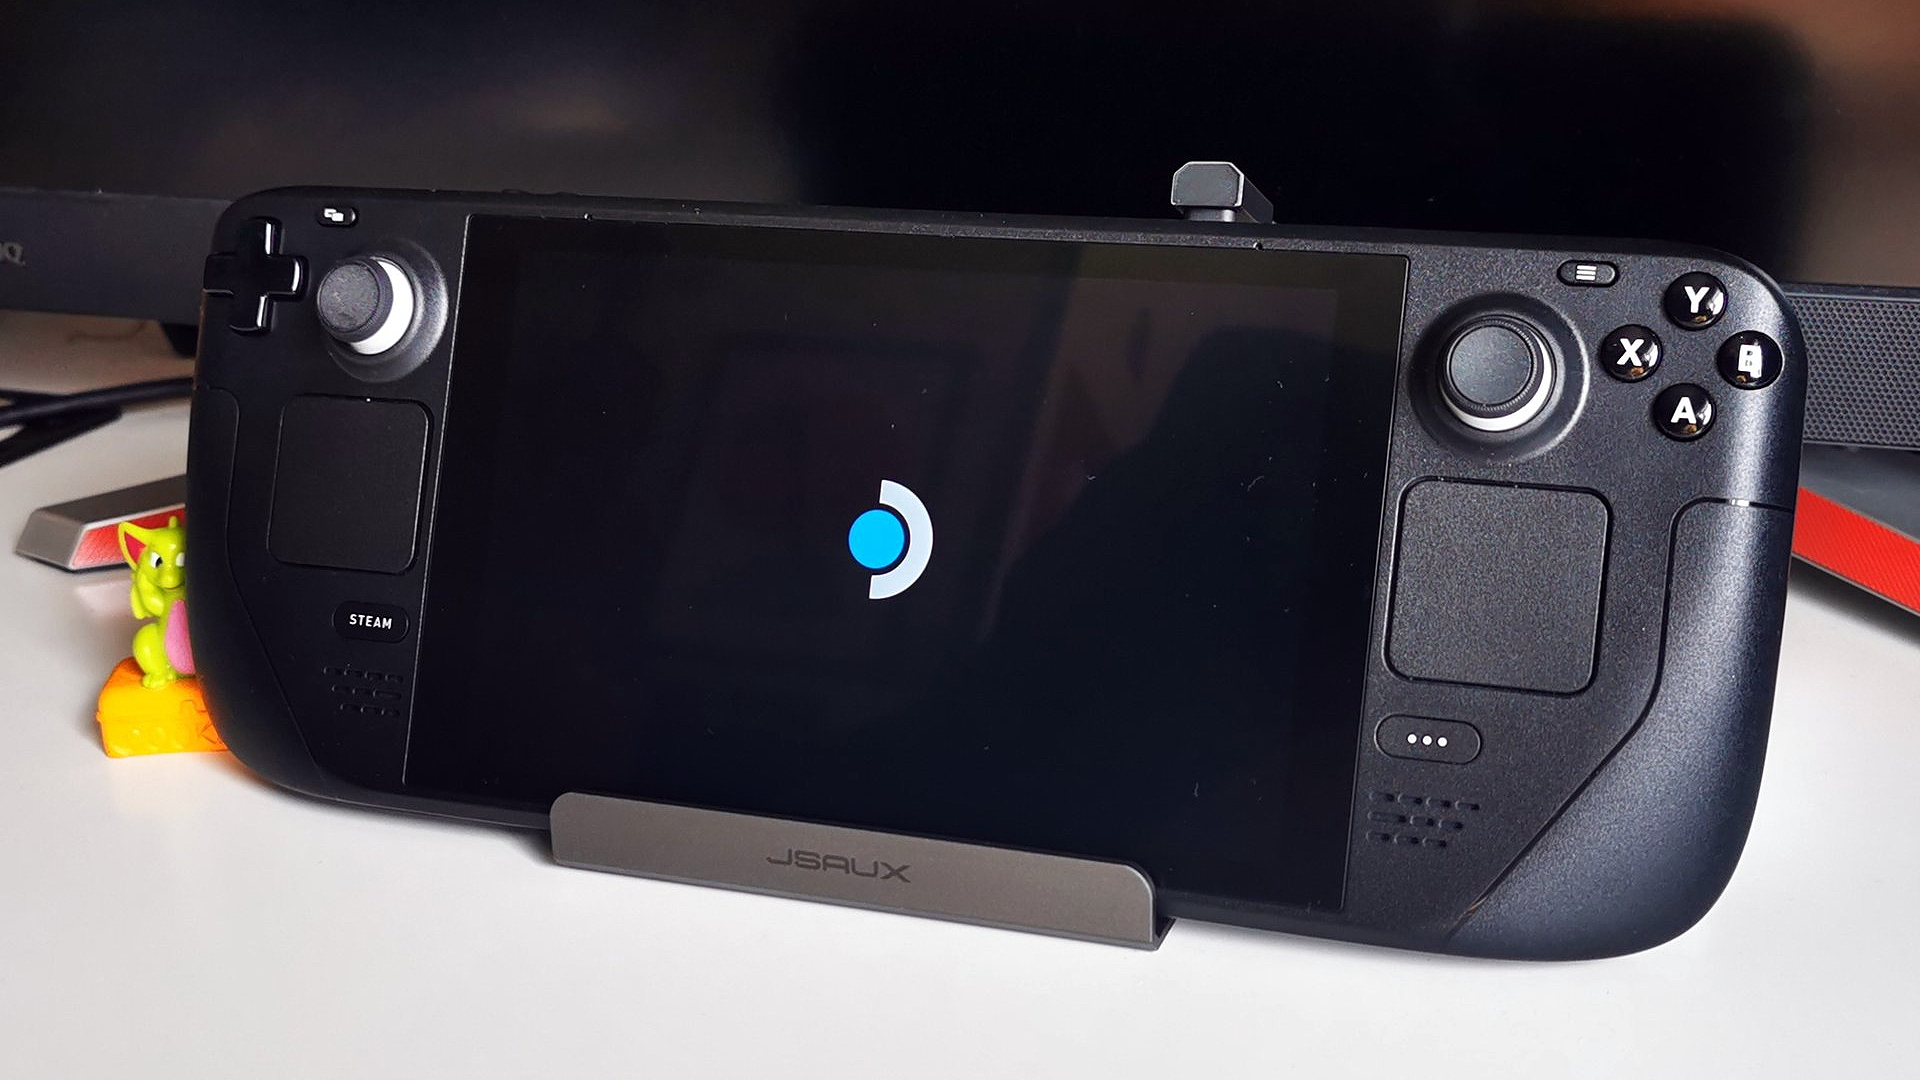 Jsaux Steam Deck dock review – a great handheld gaming PC hub